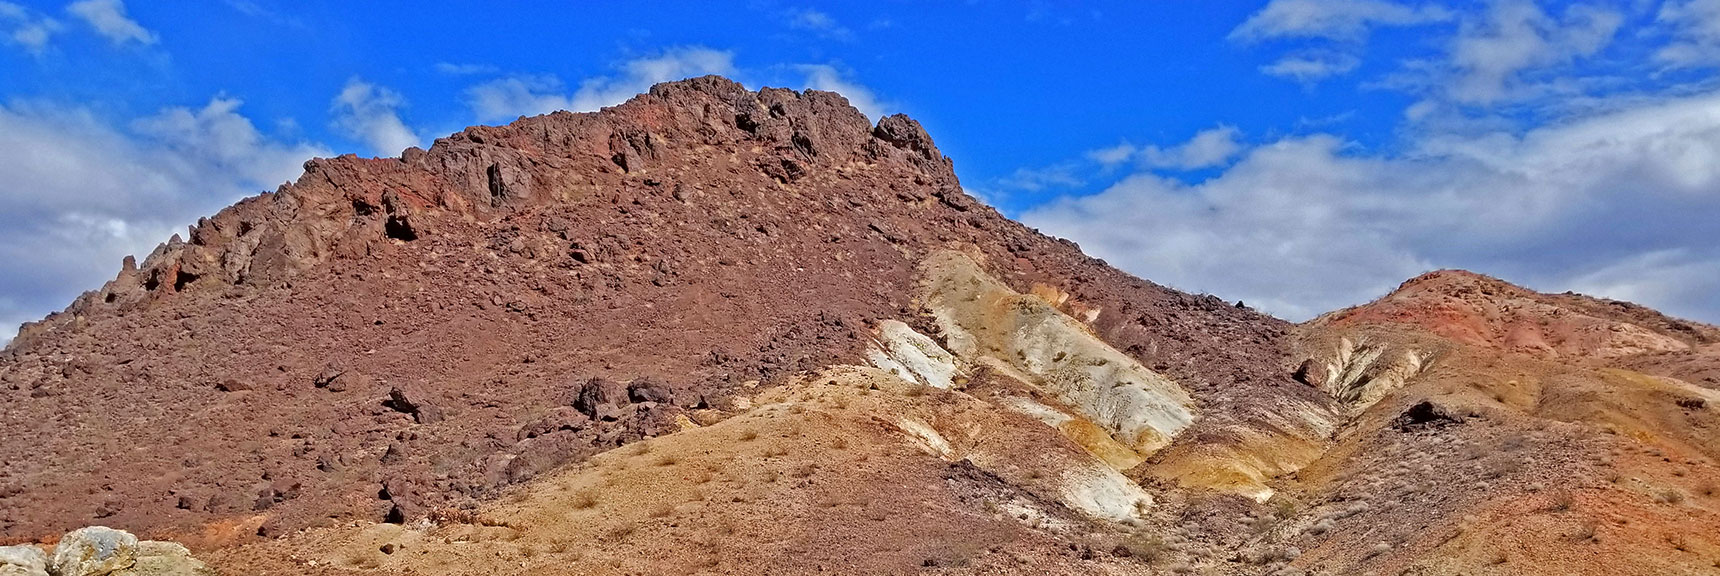 Colorful Hills Line the Trail | Historic Railroad Trail | Lake Mead National Recreation Area, Nevada